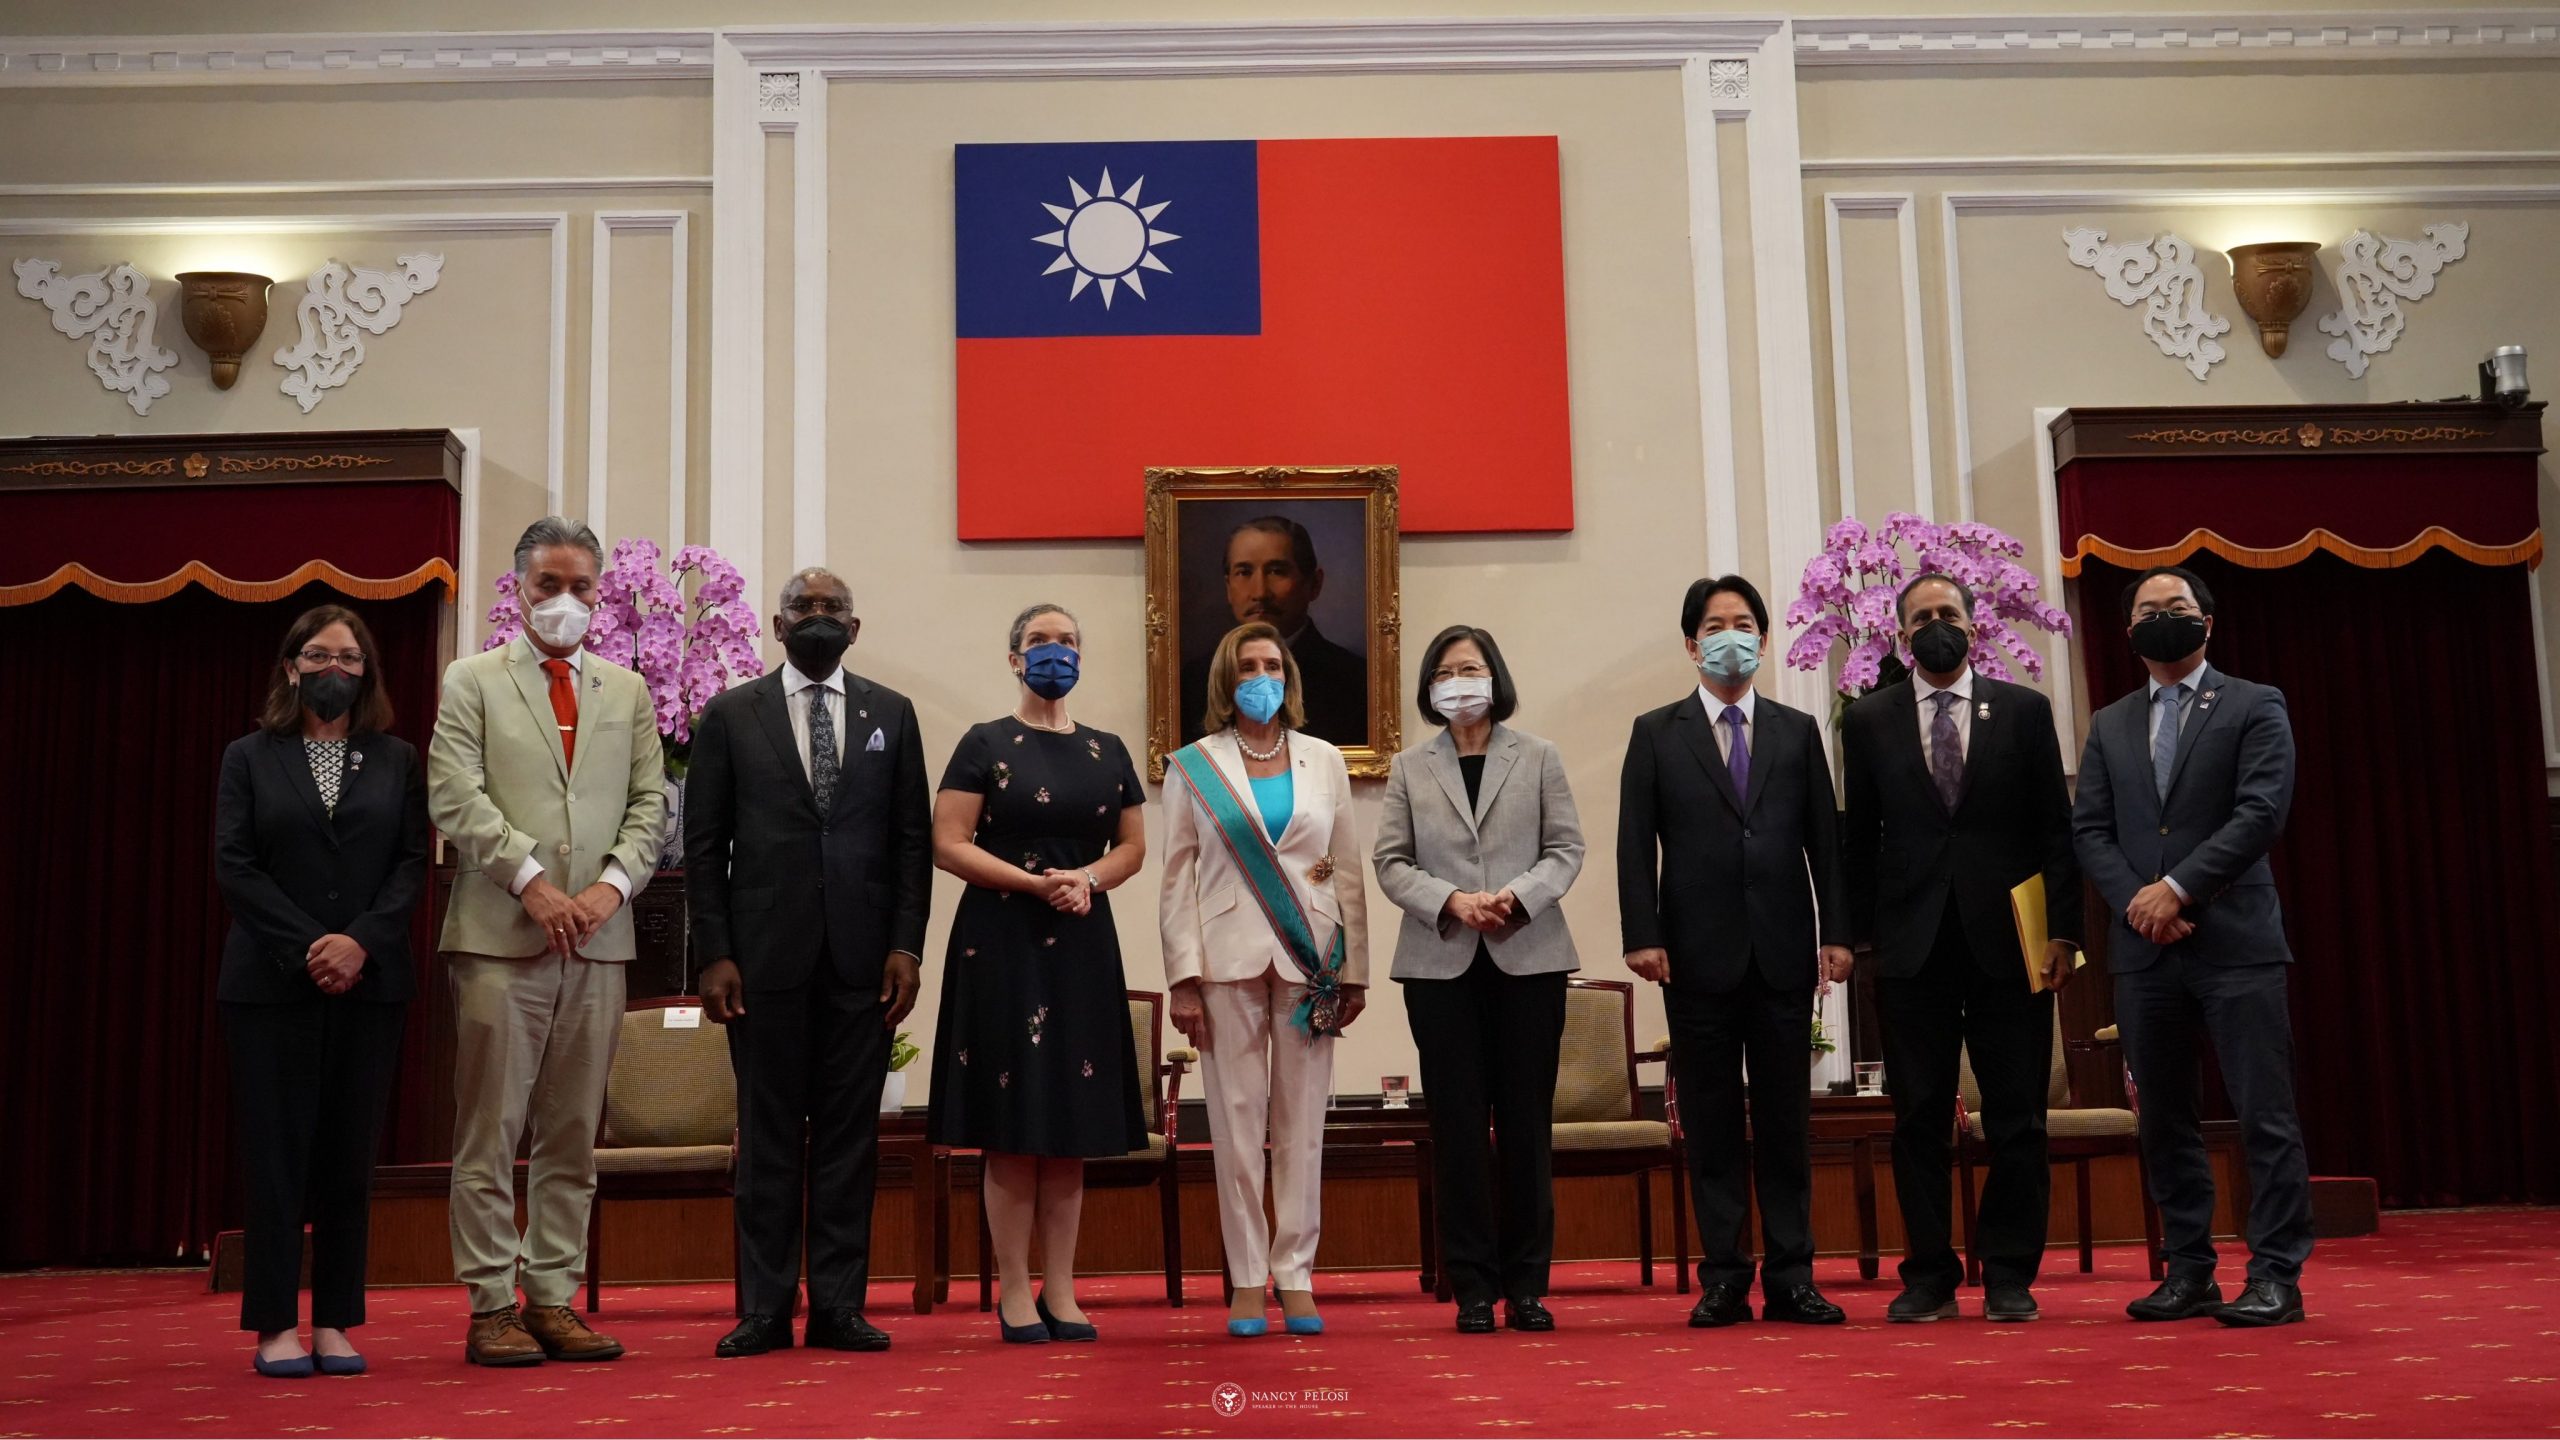 ‘They cannot prevent world leaders or anyone from traveling to Taiwan’ declares Nancy Pelosi